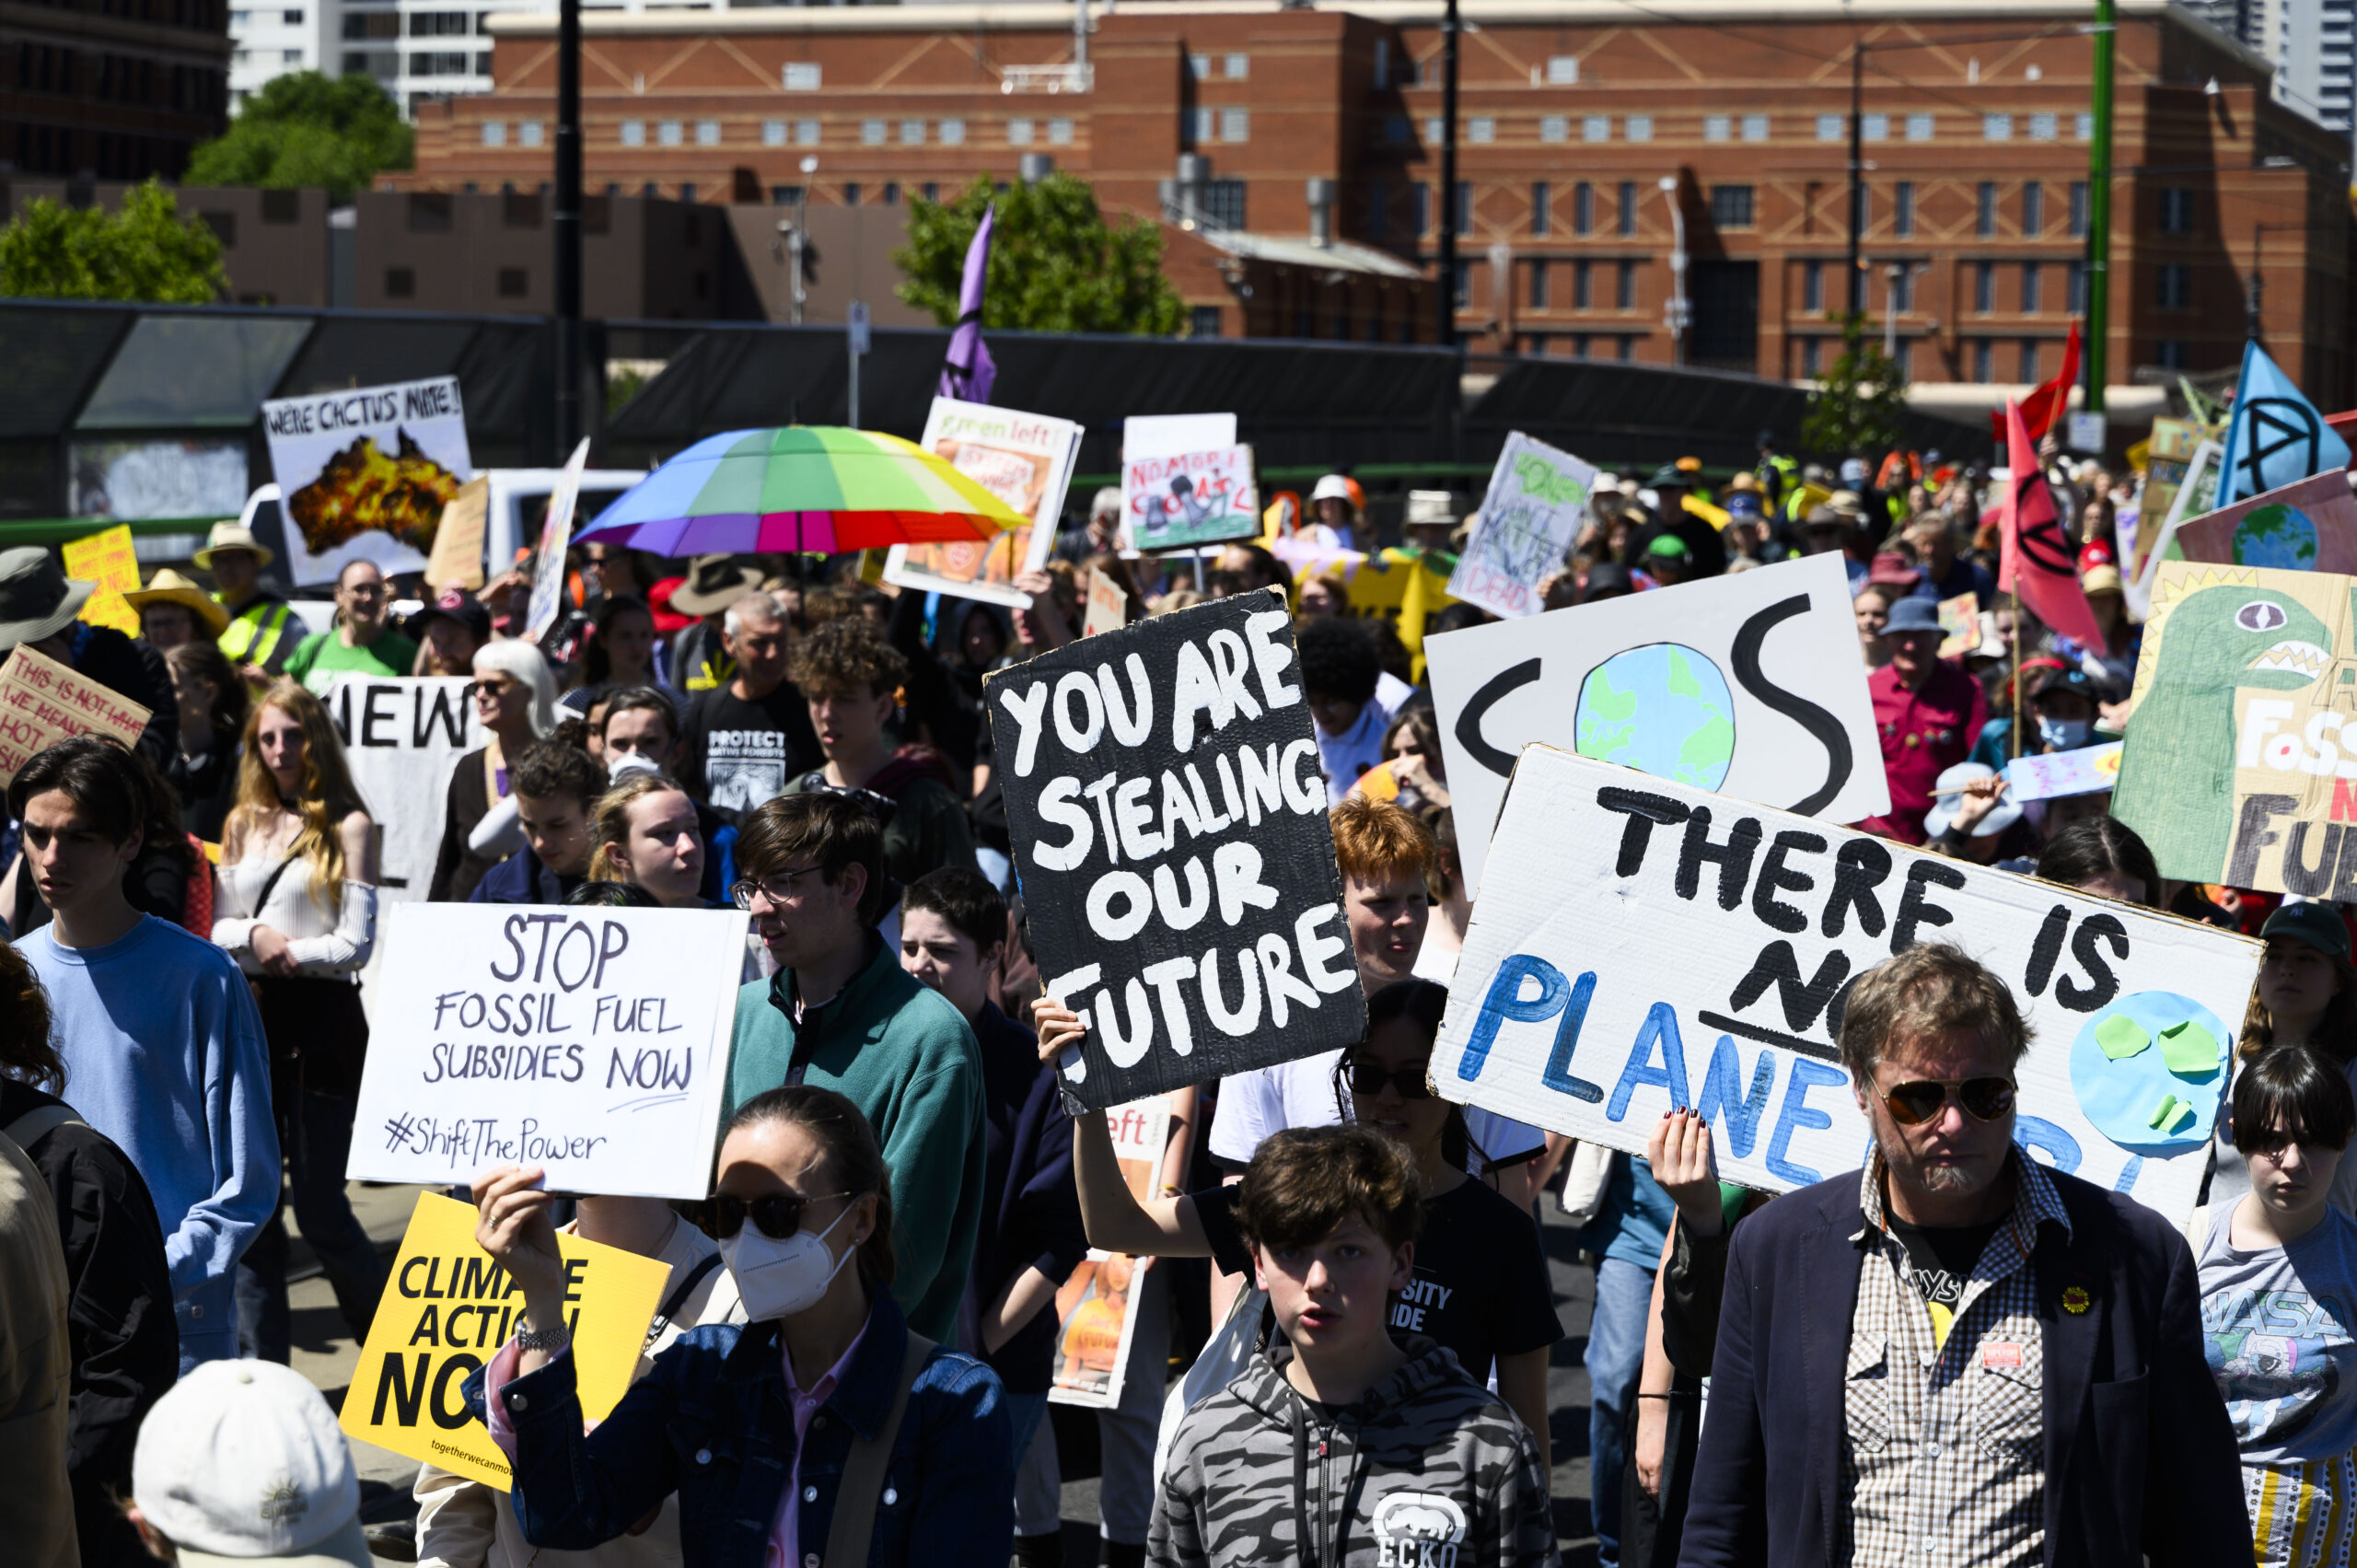 People at the School Strike for Climate holding signs with slogans in favour of climate action